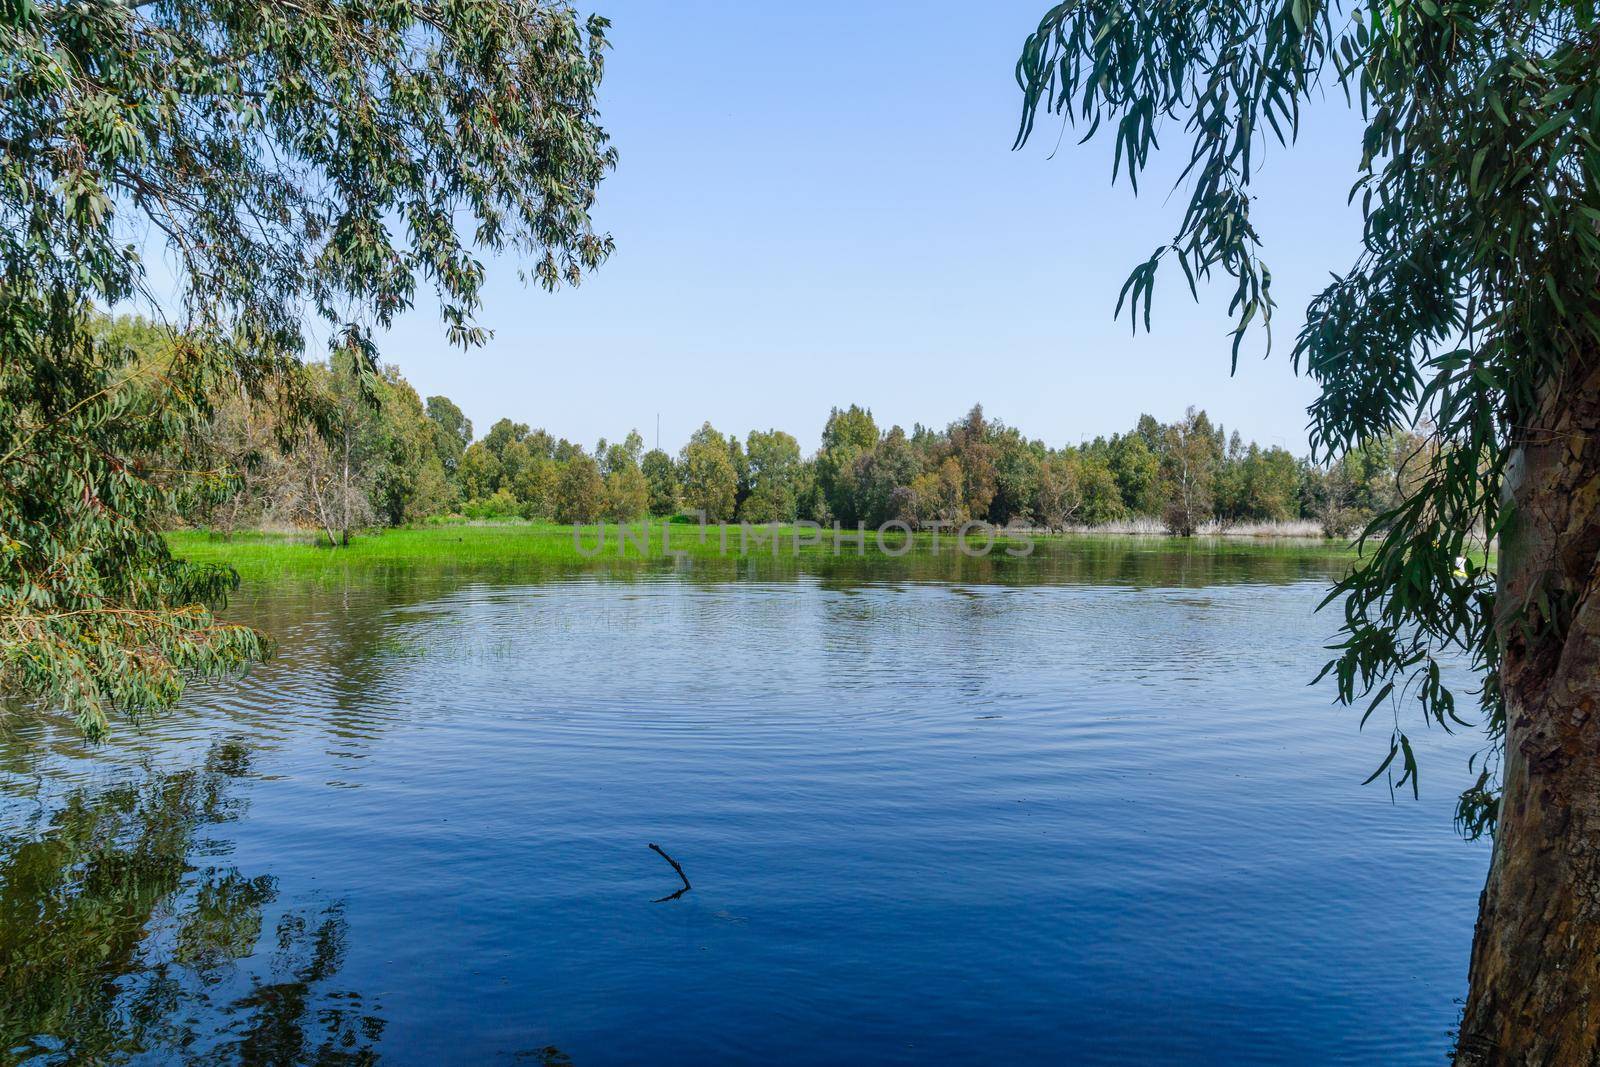 View of the Berekhat Yaar (forest pool) nature reserve, part of HaSharon park, in Hadera, Northern Israel